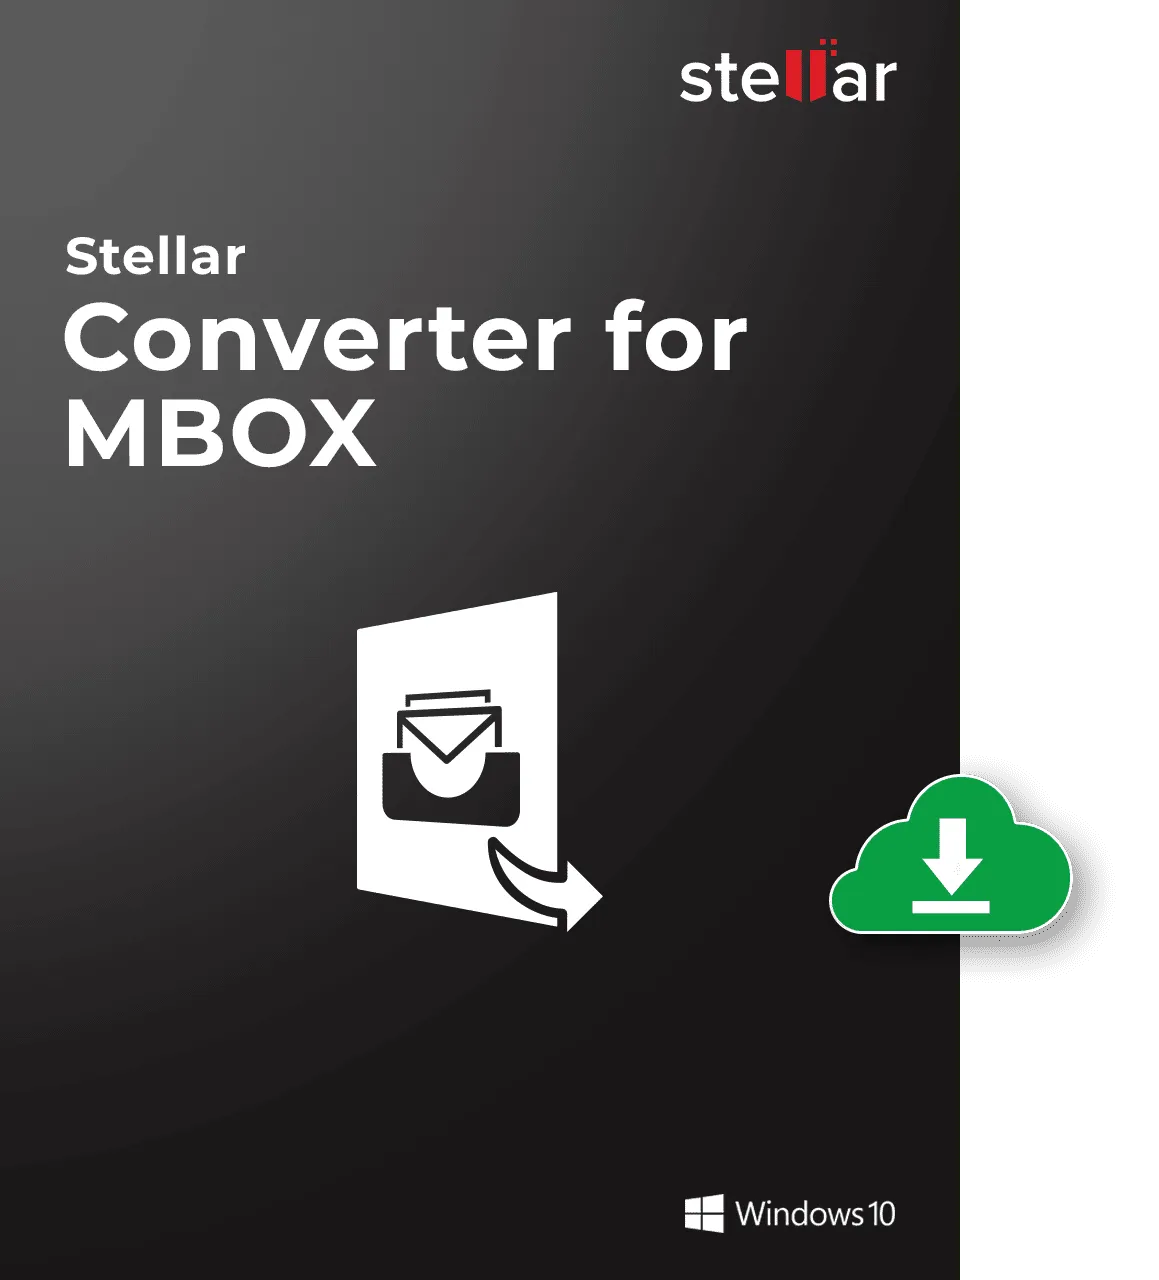  Converter for MBOX Corporate